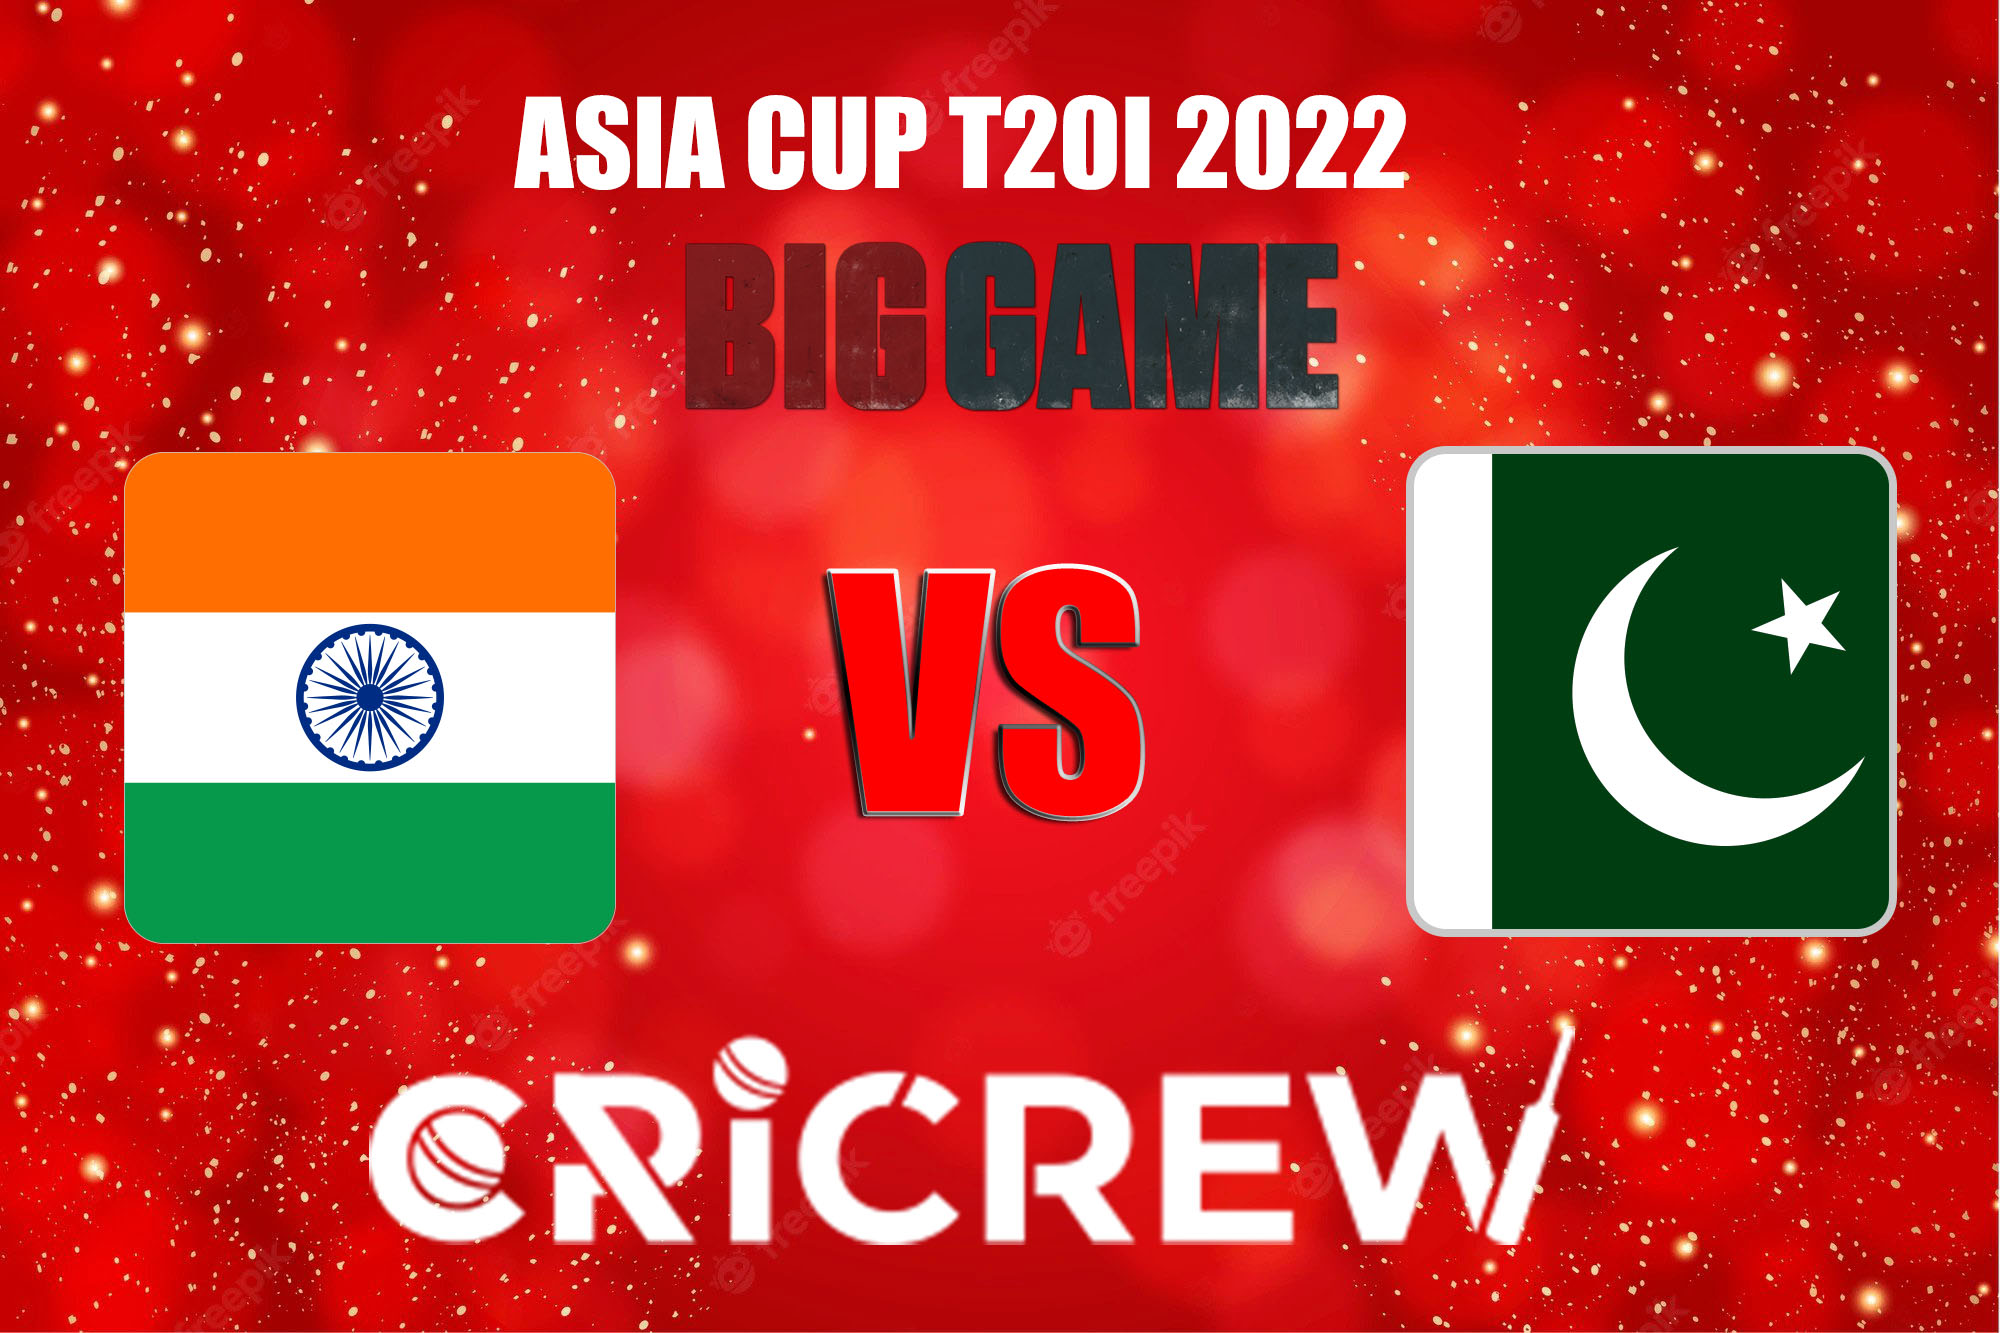 IND vs PAK Live Score starts on 28th August at 7:30 PM IST at The Dubai International Cricket Stadium, Dubai. Here on www.cricrew.com you can find all Live.....